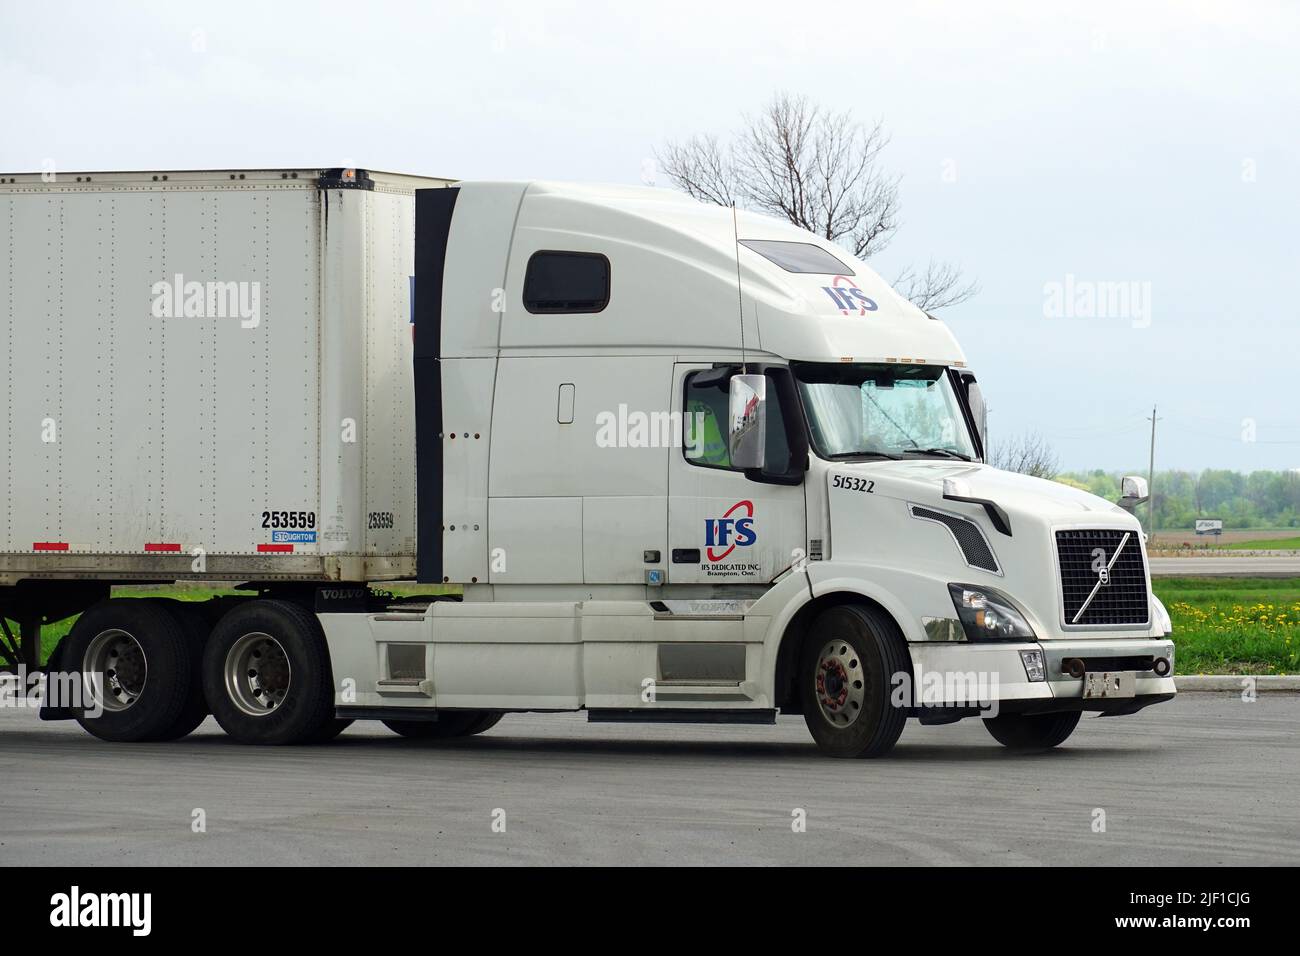 Volvo truck, (is a truck manufacturing division of Volvo based in Gothenburg, Sweden), Canada, North America Stock Photo